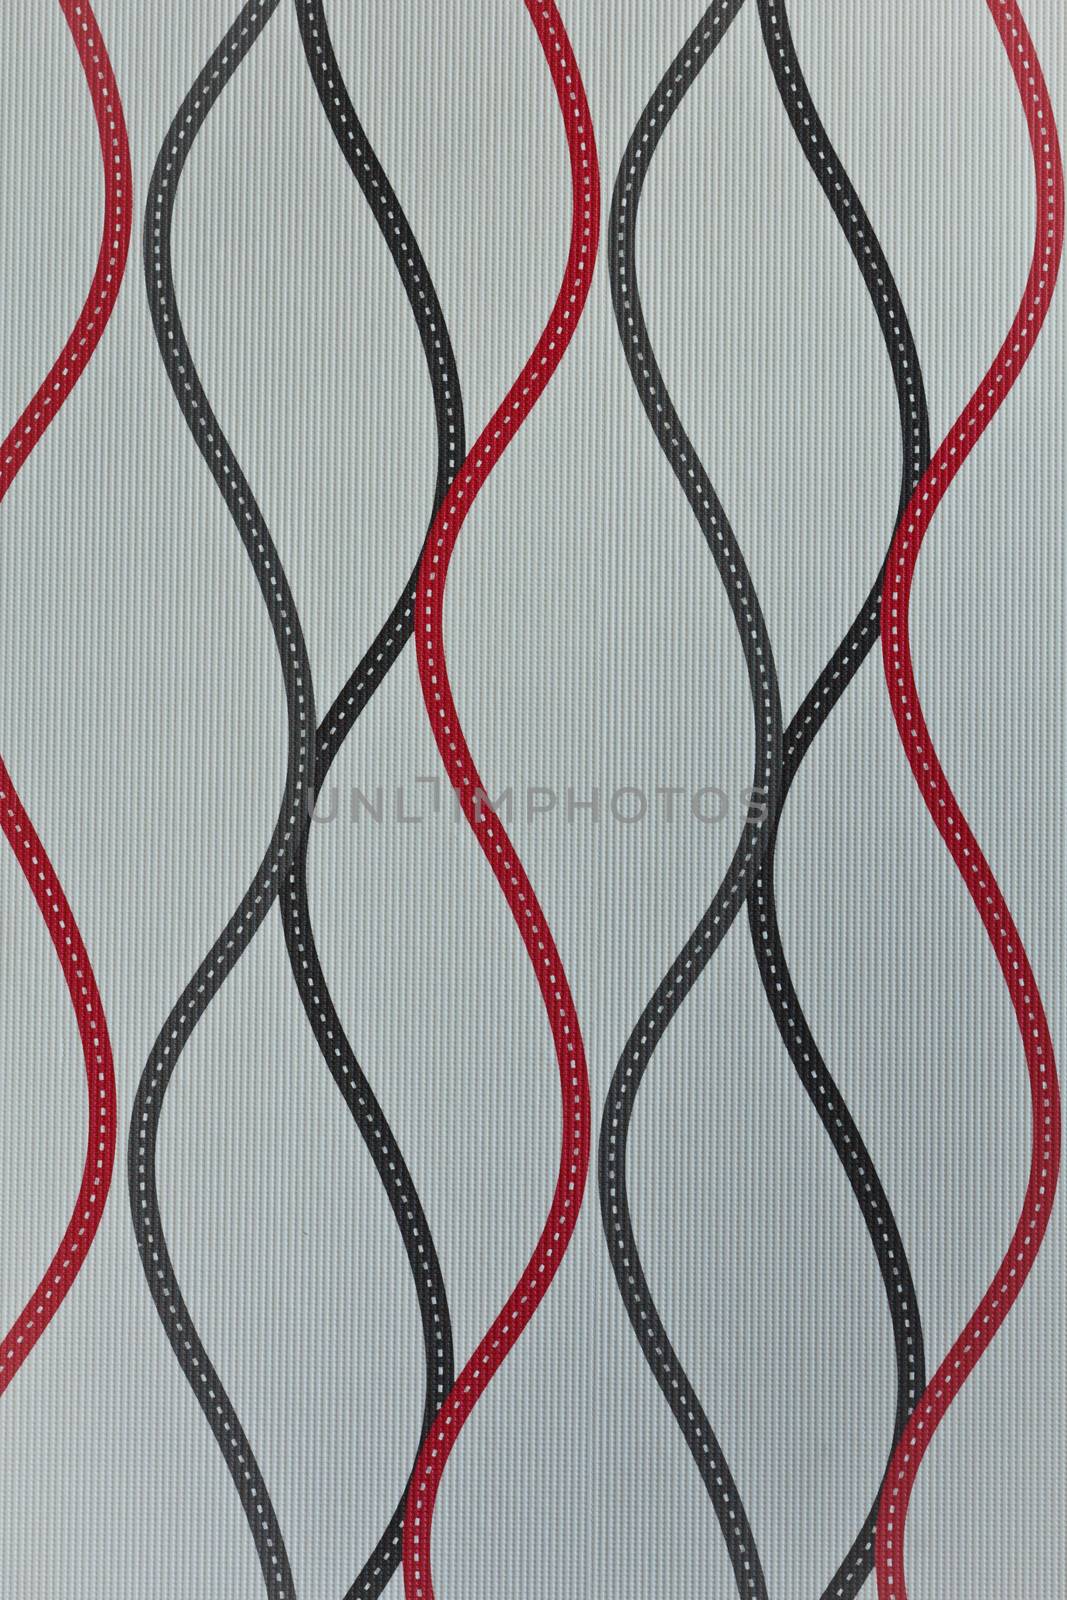 Wall pattern of red and black cloth